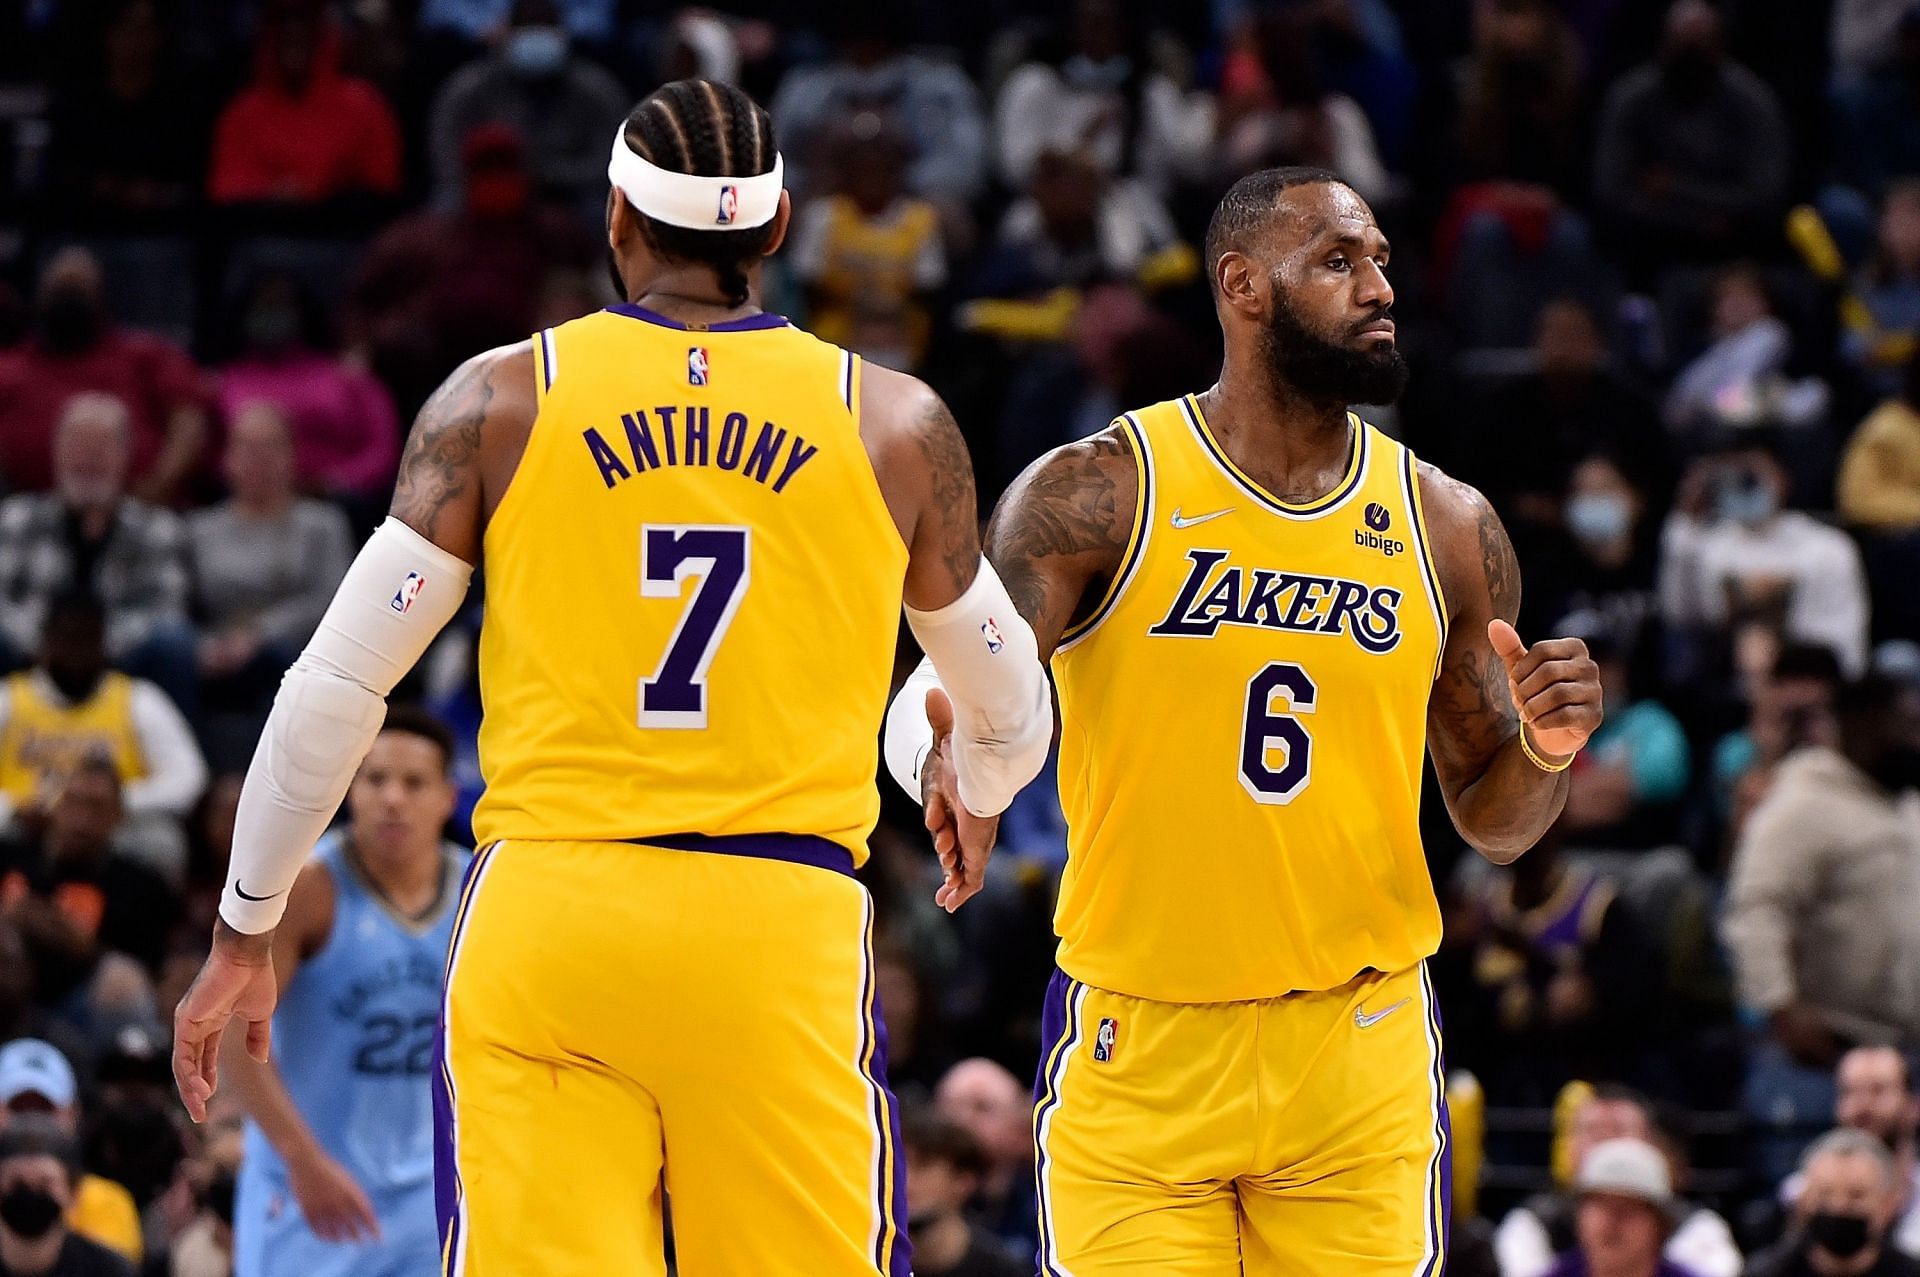 Carmelo Anthony and LeBron James of the LA Lakers